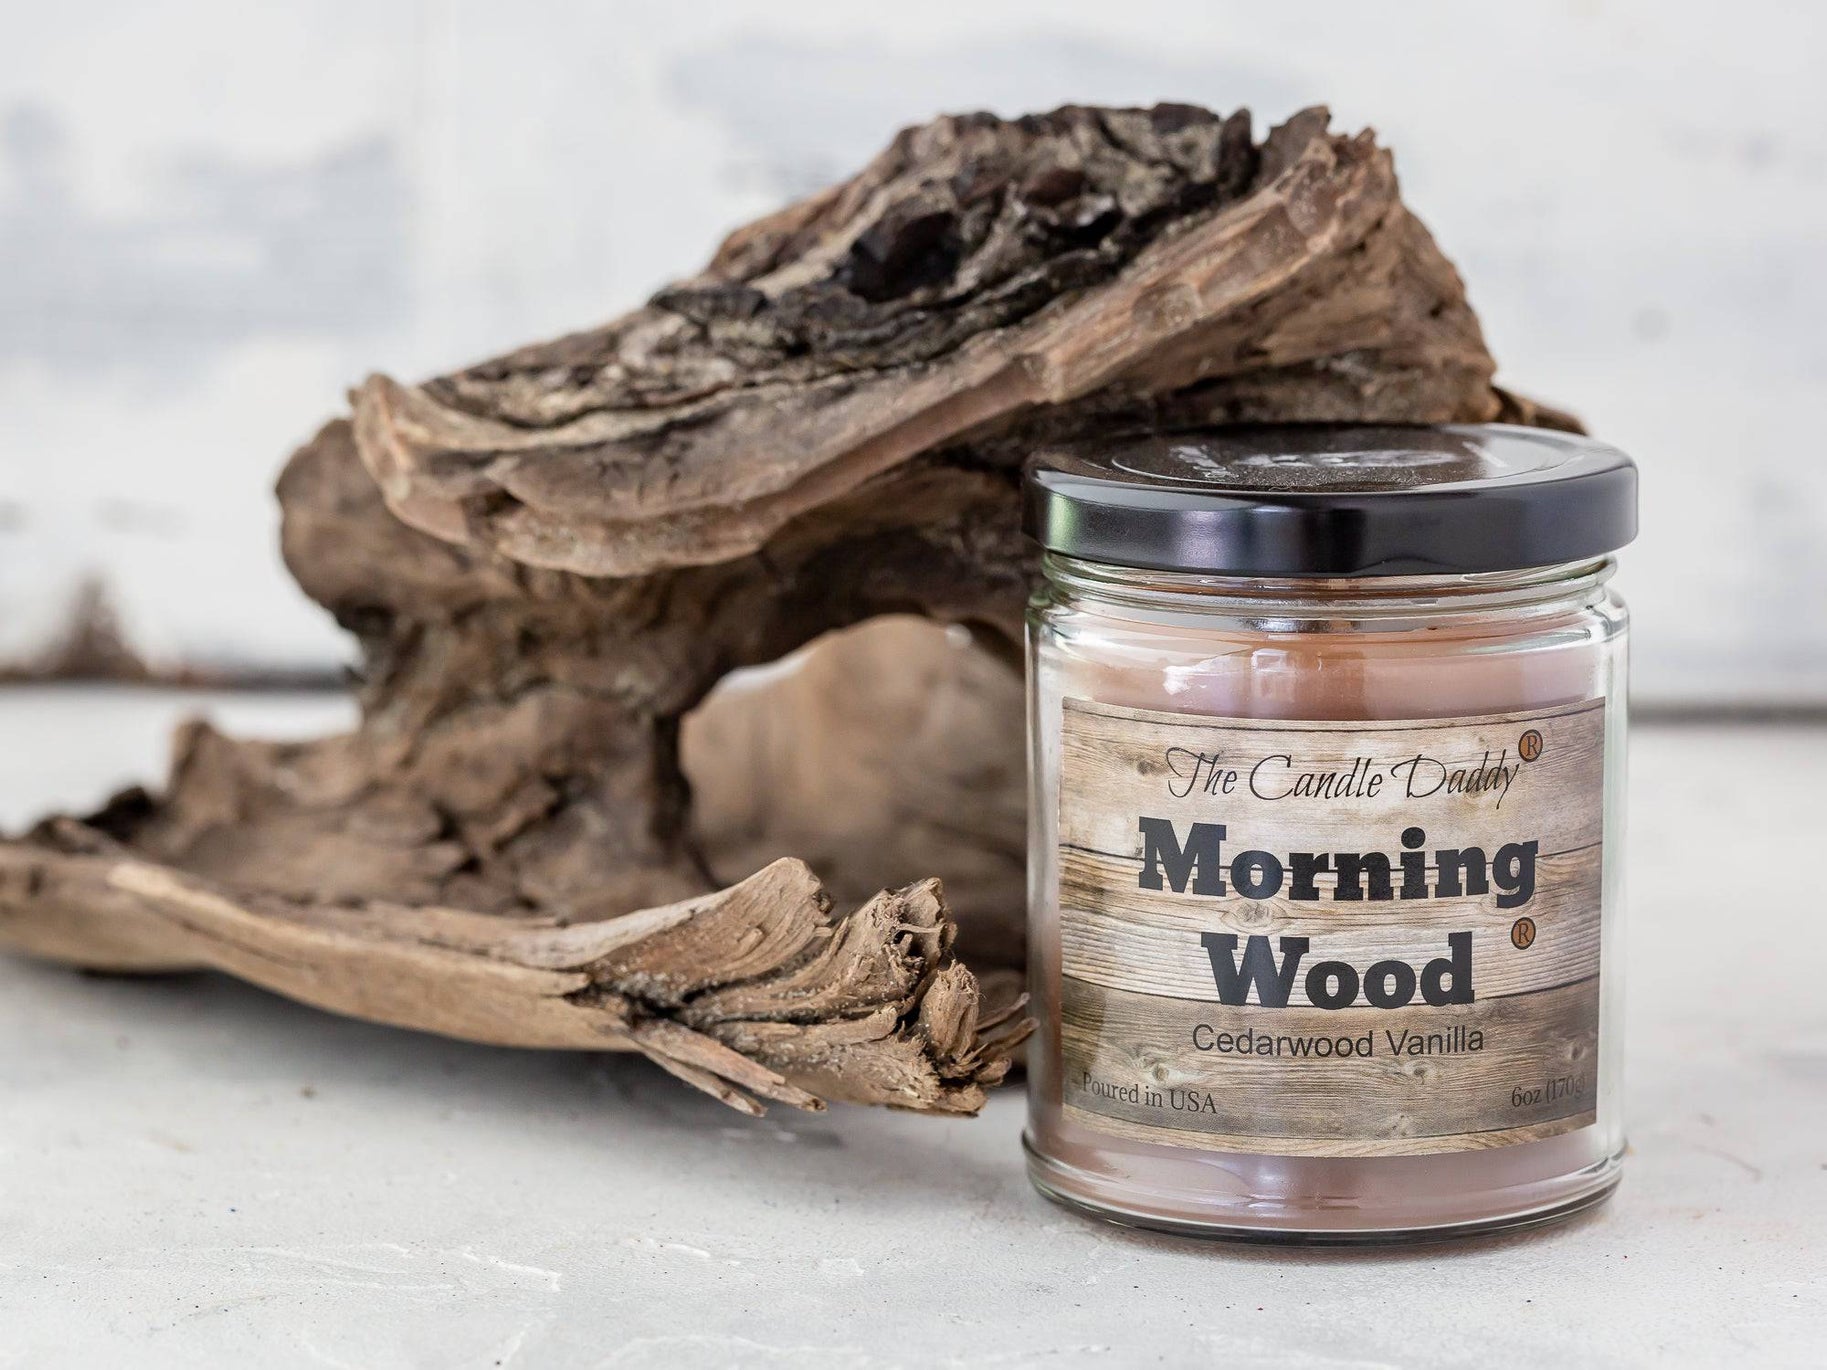 Morning Wood Candle - Heavy Wood Scent- Cedarwood Vanilla Scent 6 Ounce - 40 Hour Burn.